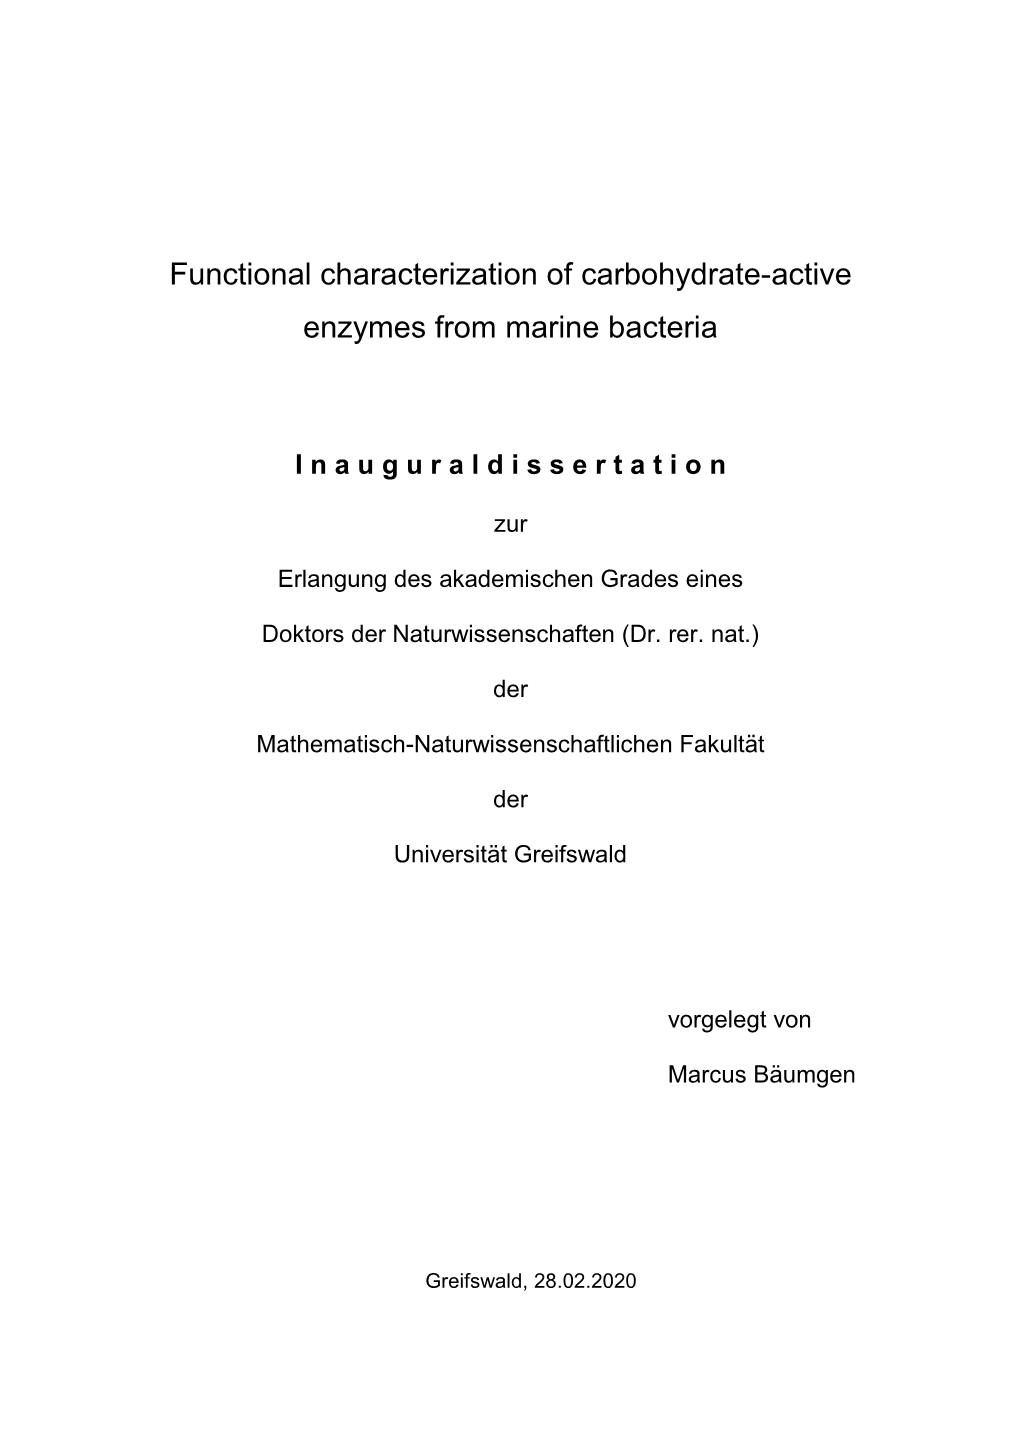 Functional Characterization of Carbohydrate-Active Enzymes from Marine Bacteria